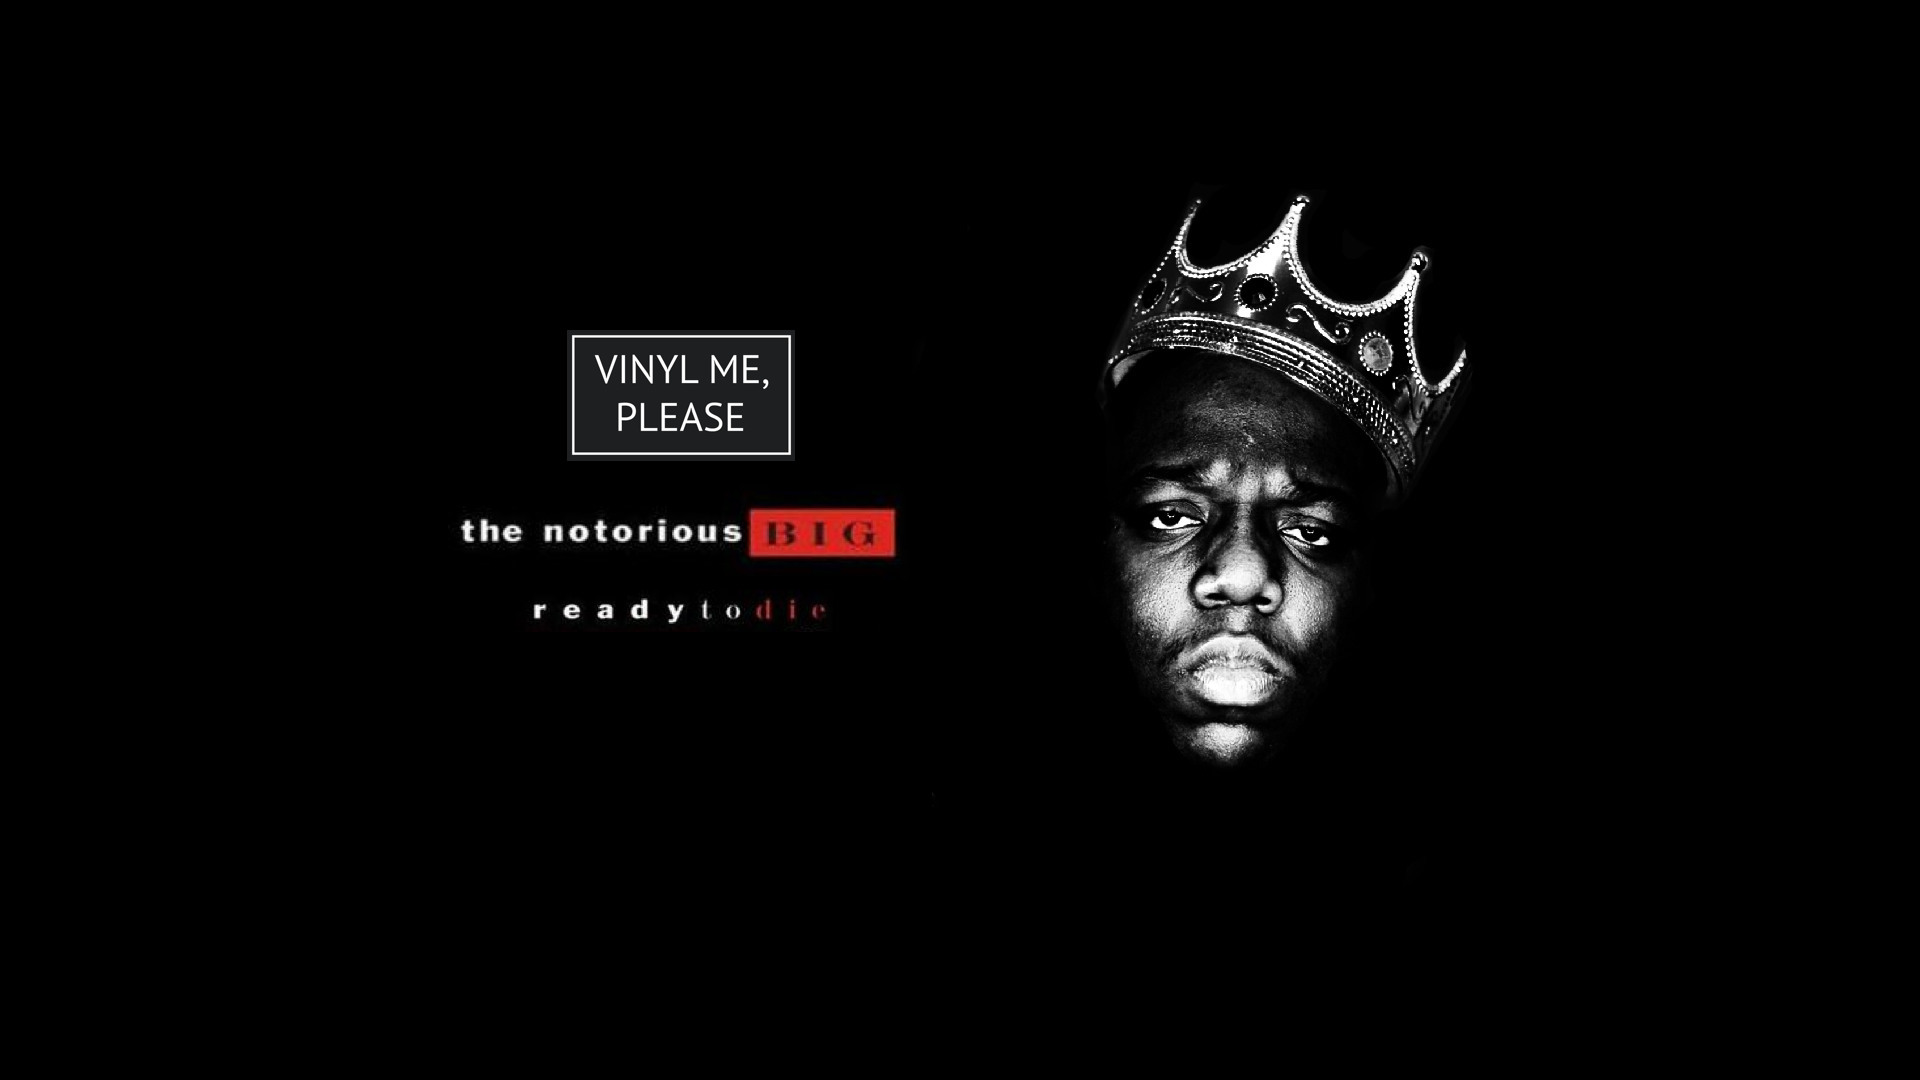 Vinyl me, please september edition: the notorious b. I. G. ‘ready to die’